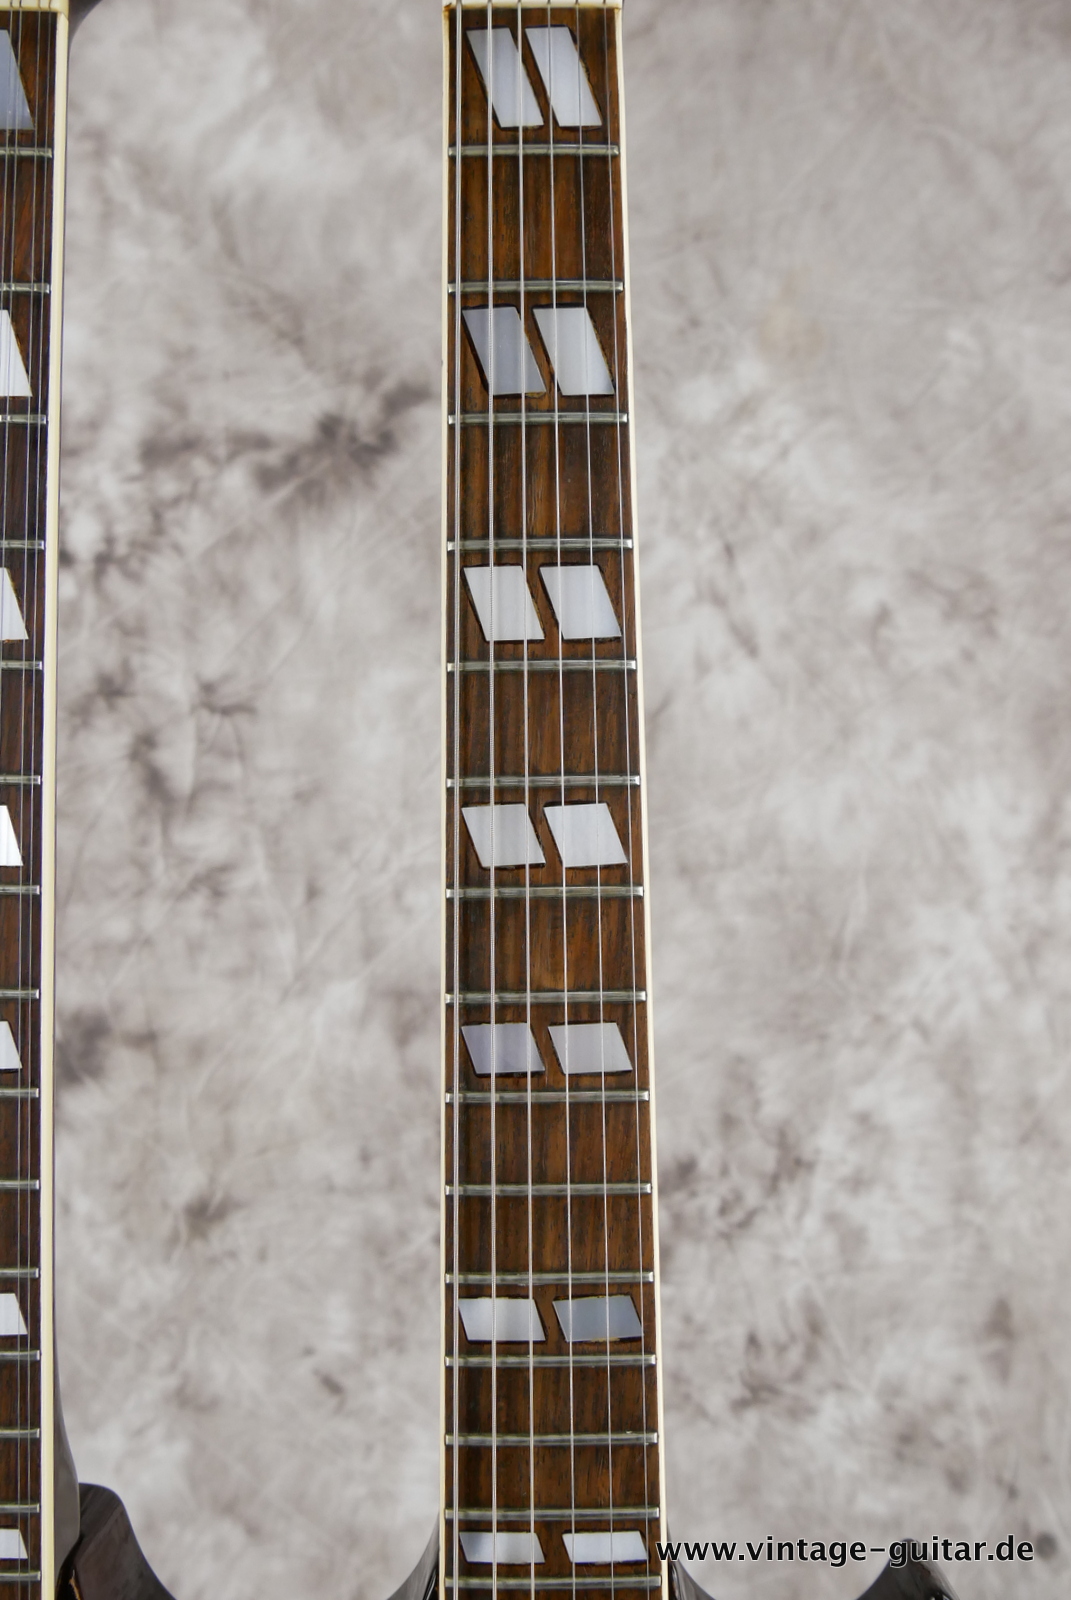 Ibanez_Mod_2402_double_neck_12string_6string_sgstyle_sg_style_1970_70s_stairway_to_heaven-022.JPG